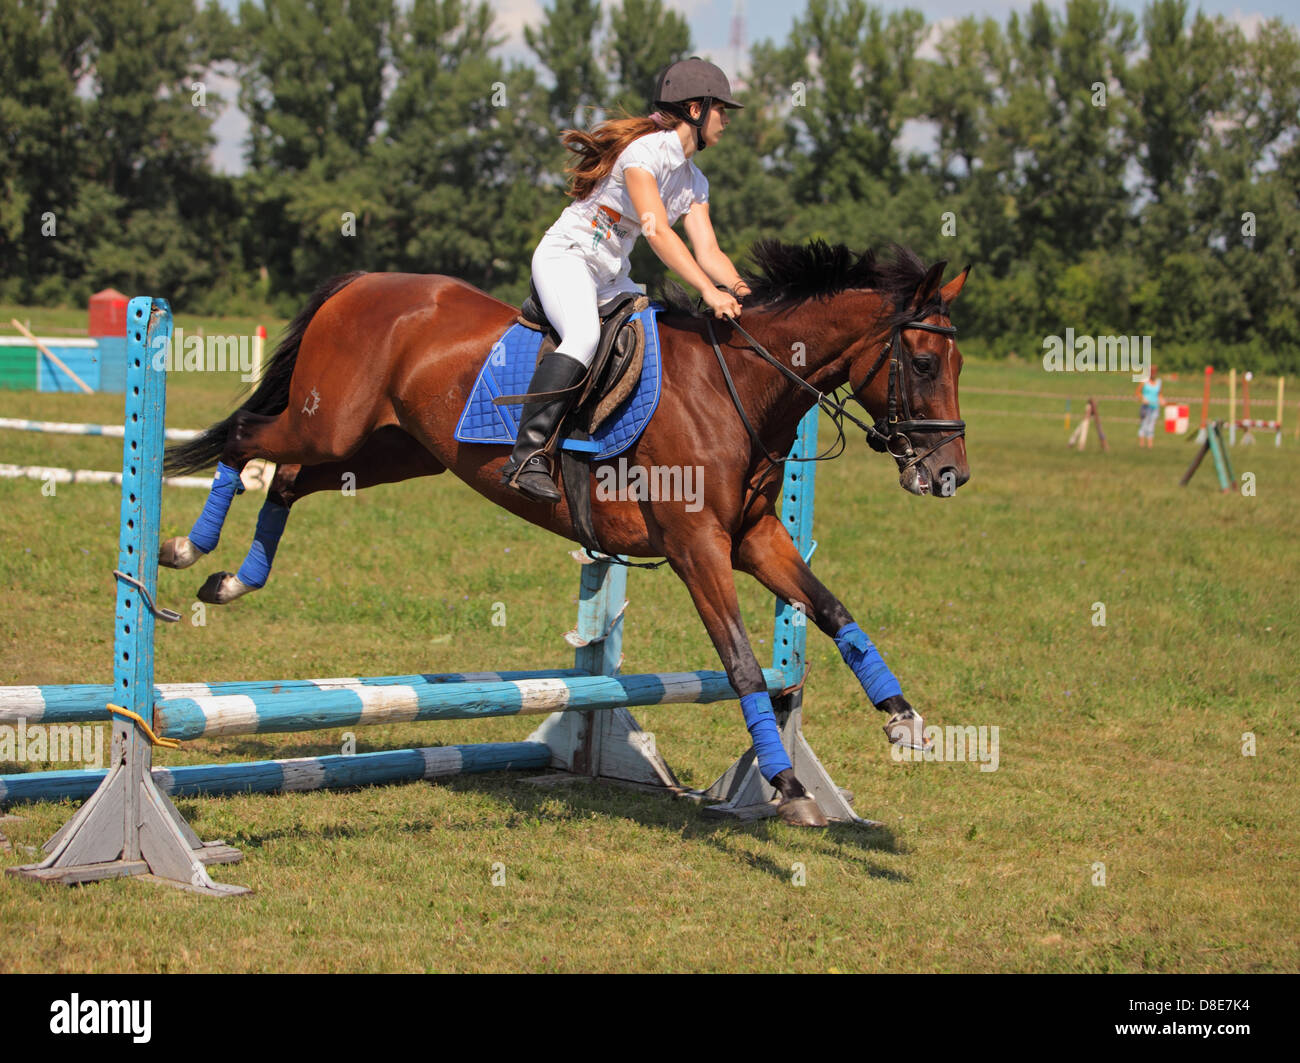 Girl partecipating in a show jumping competition Stock Photo